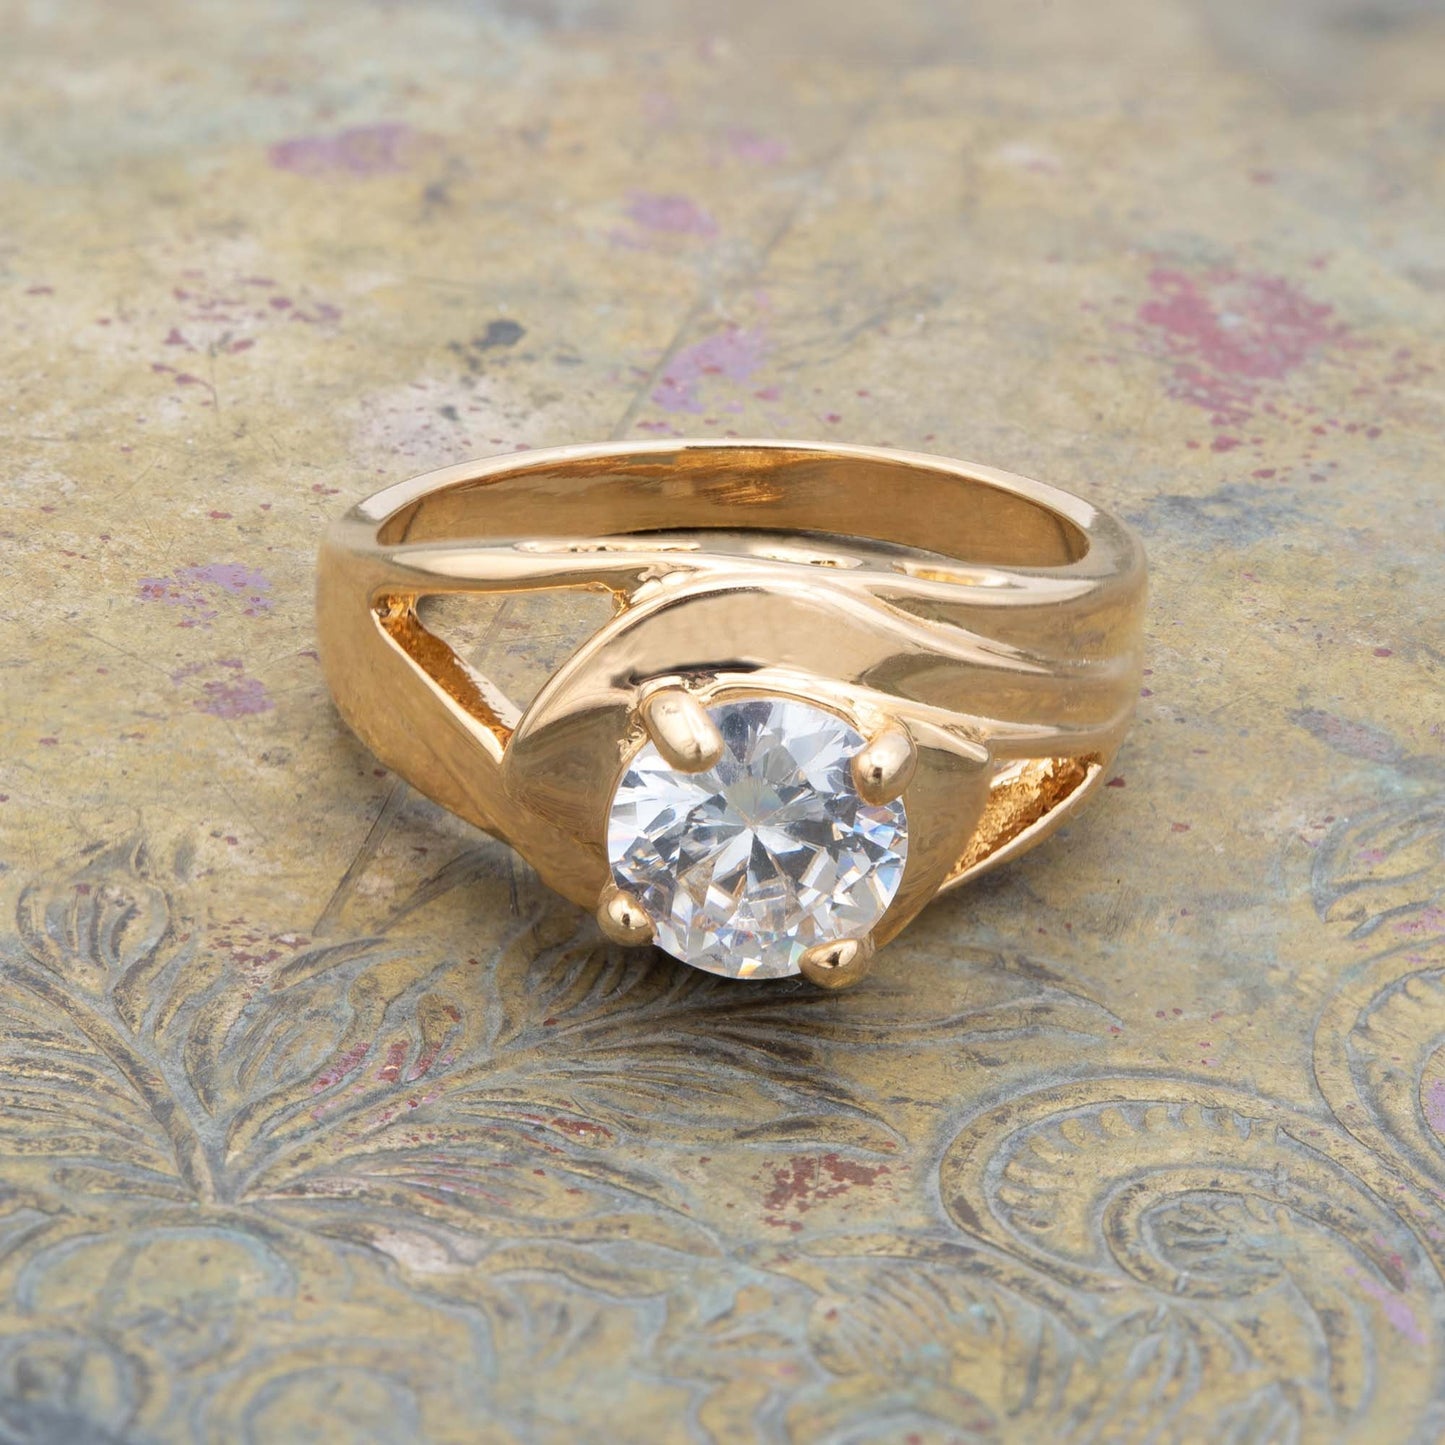 Vintage Ring 1.50 ct. Cubic Zirconia Solitaire Engagement Style Ring 18KT Gold Antique Womans Jewelry #R3428 - Limited Stock - Never Worn